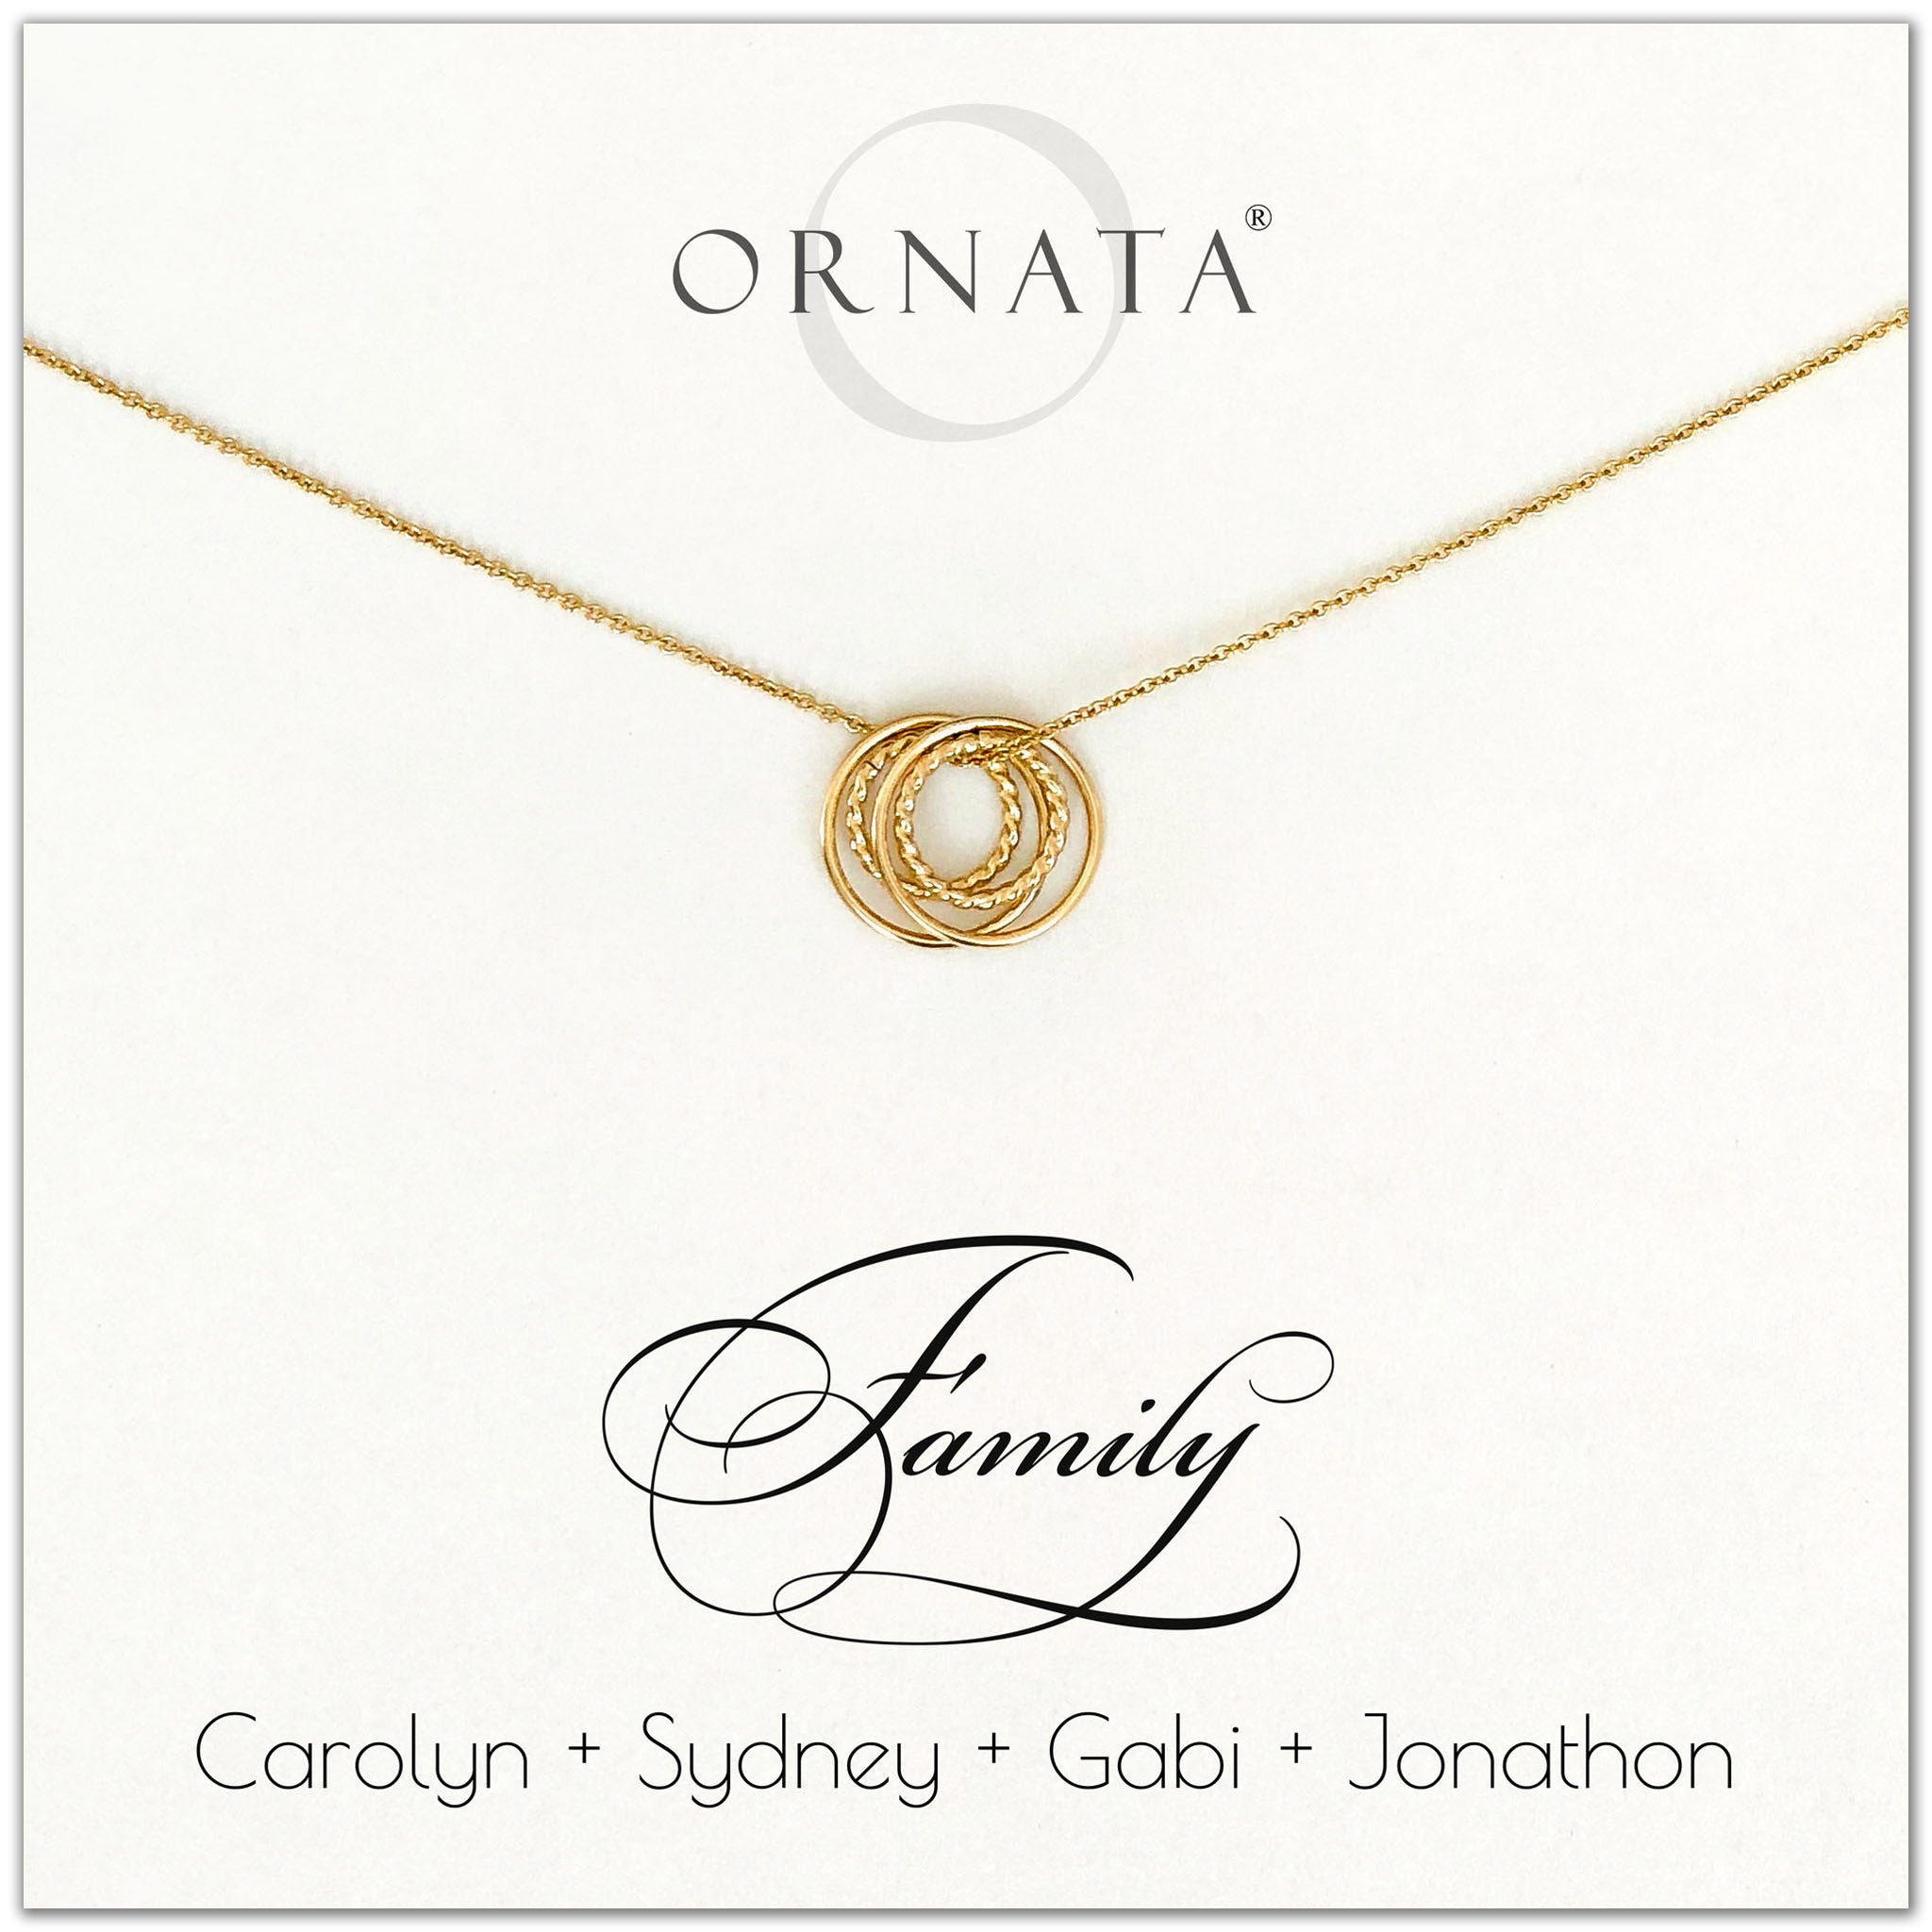 Family of Four Personalized gold necklaces for families of 4. Our 14 karat gold filled custom jewelry is a perfect gift for new families, newlyweds, parents, new parents, friends, sisters, mothers, and grandmothers. Family jewelry is also a good gift for Mother’s Day. 